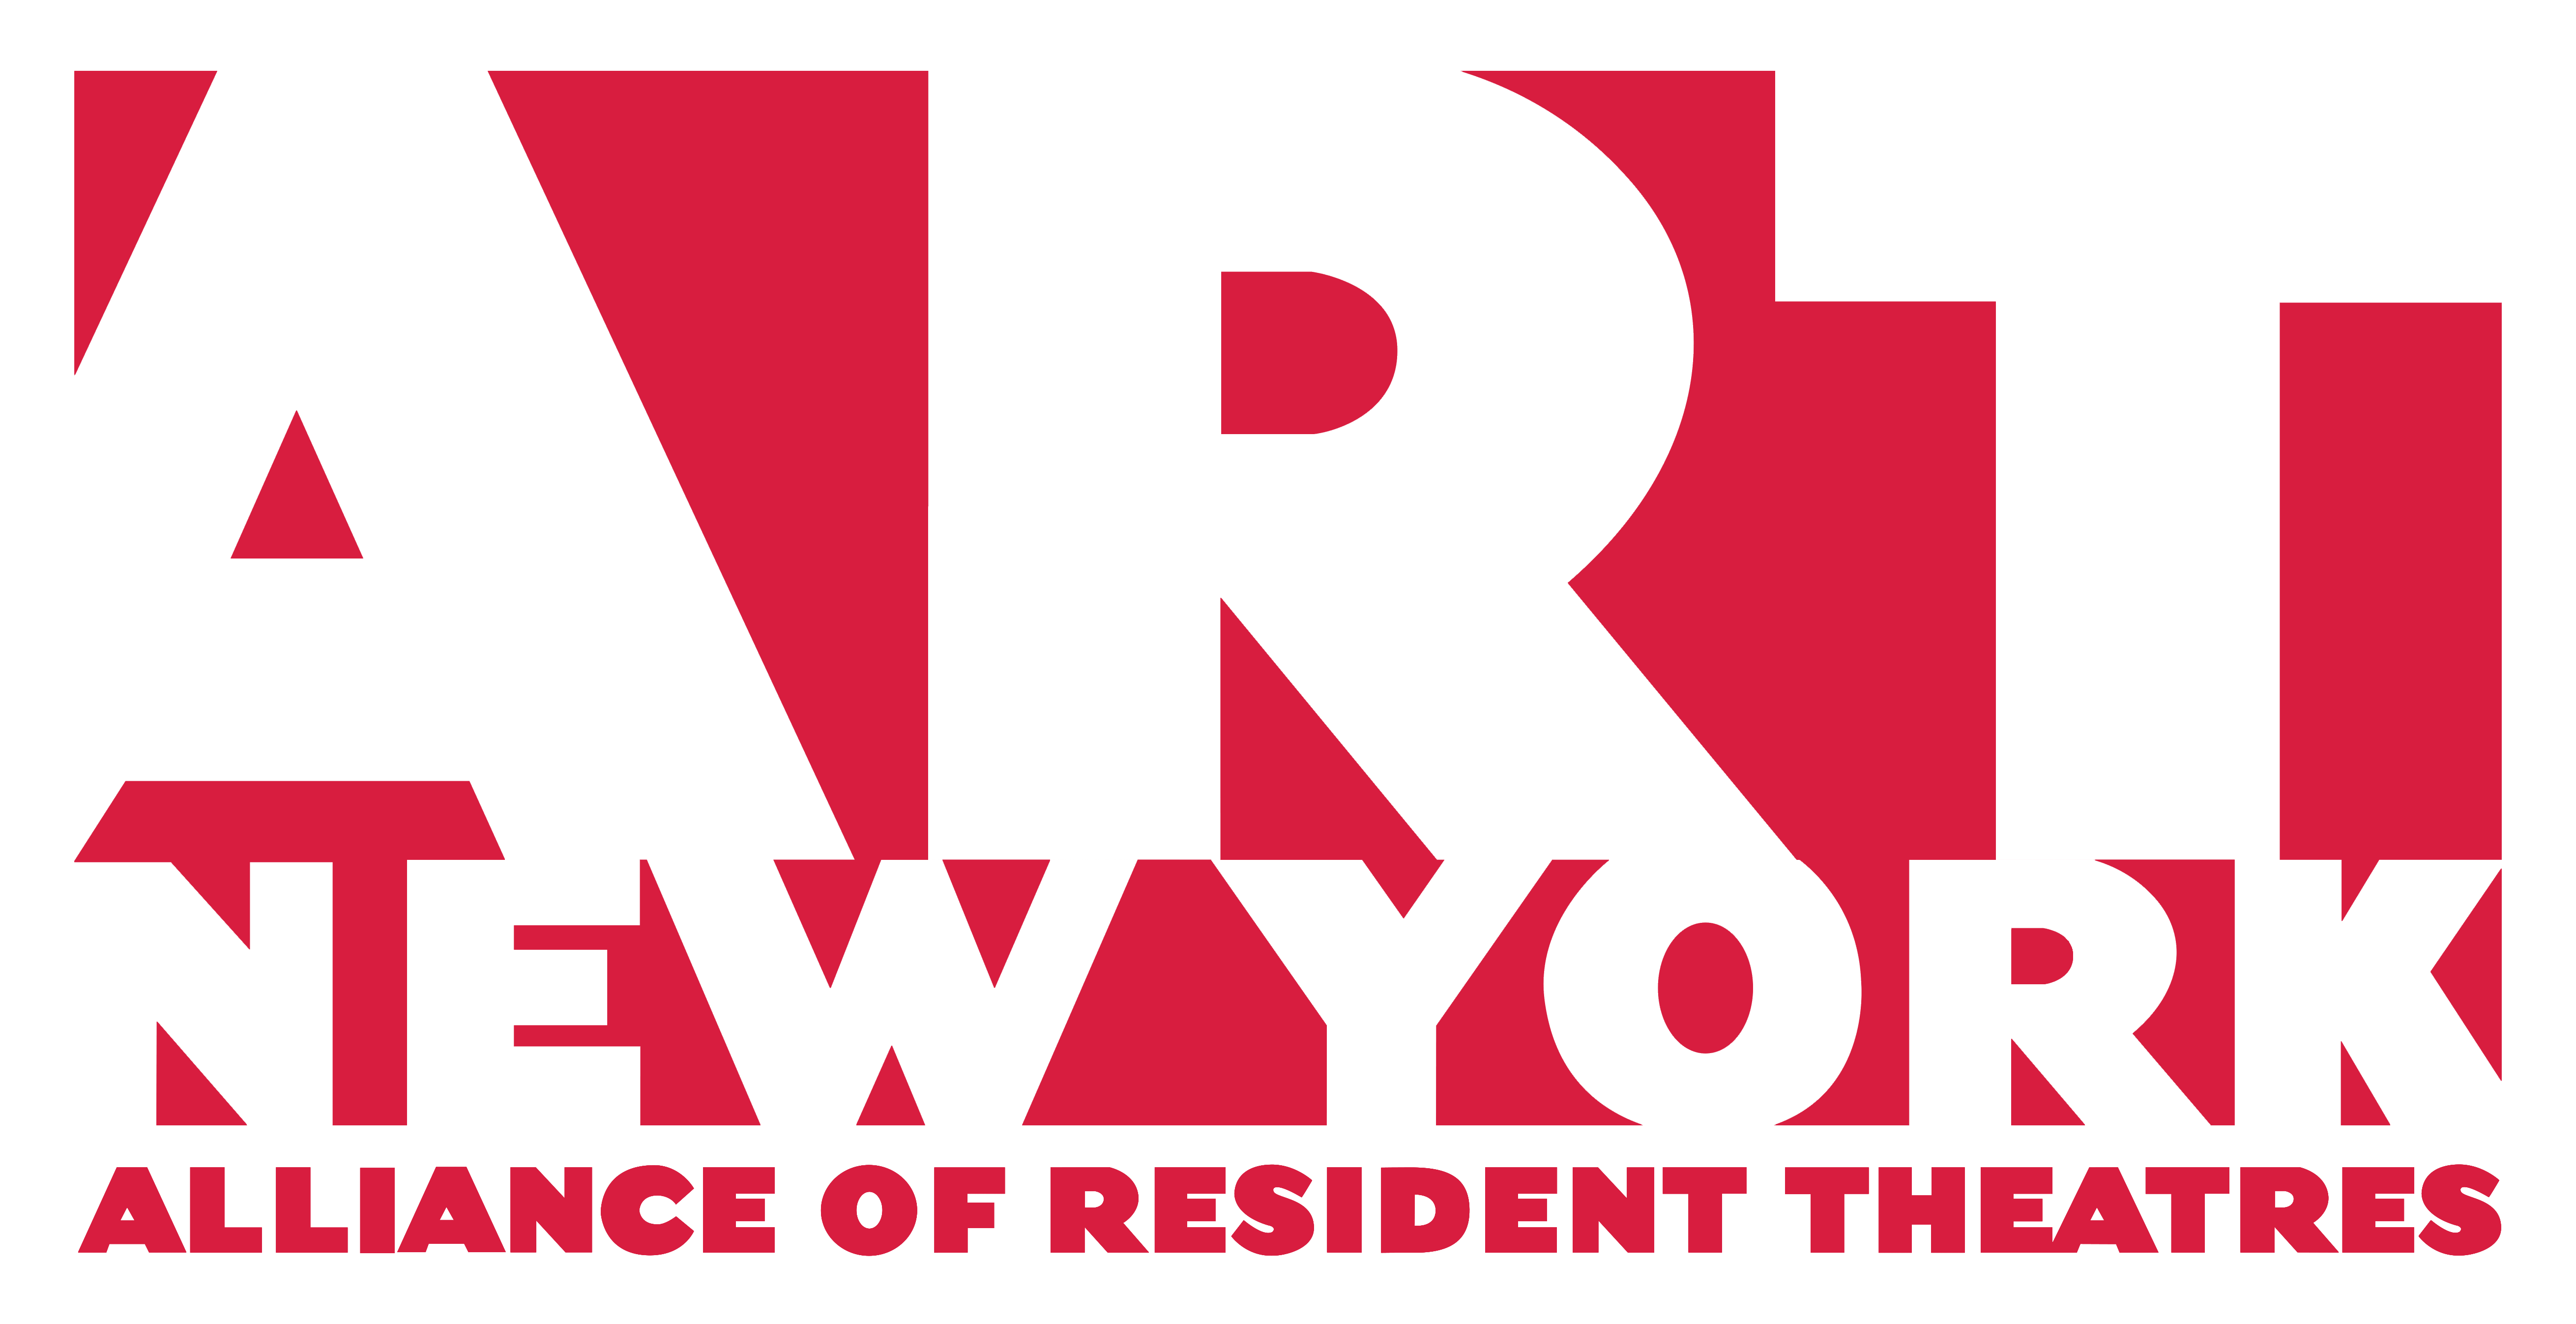 Alliance of Resident Theatres A.R.T./New York logo on MTF's website